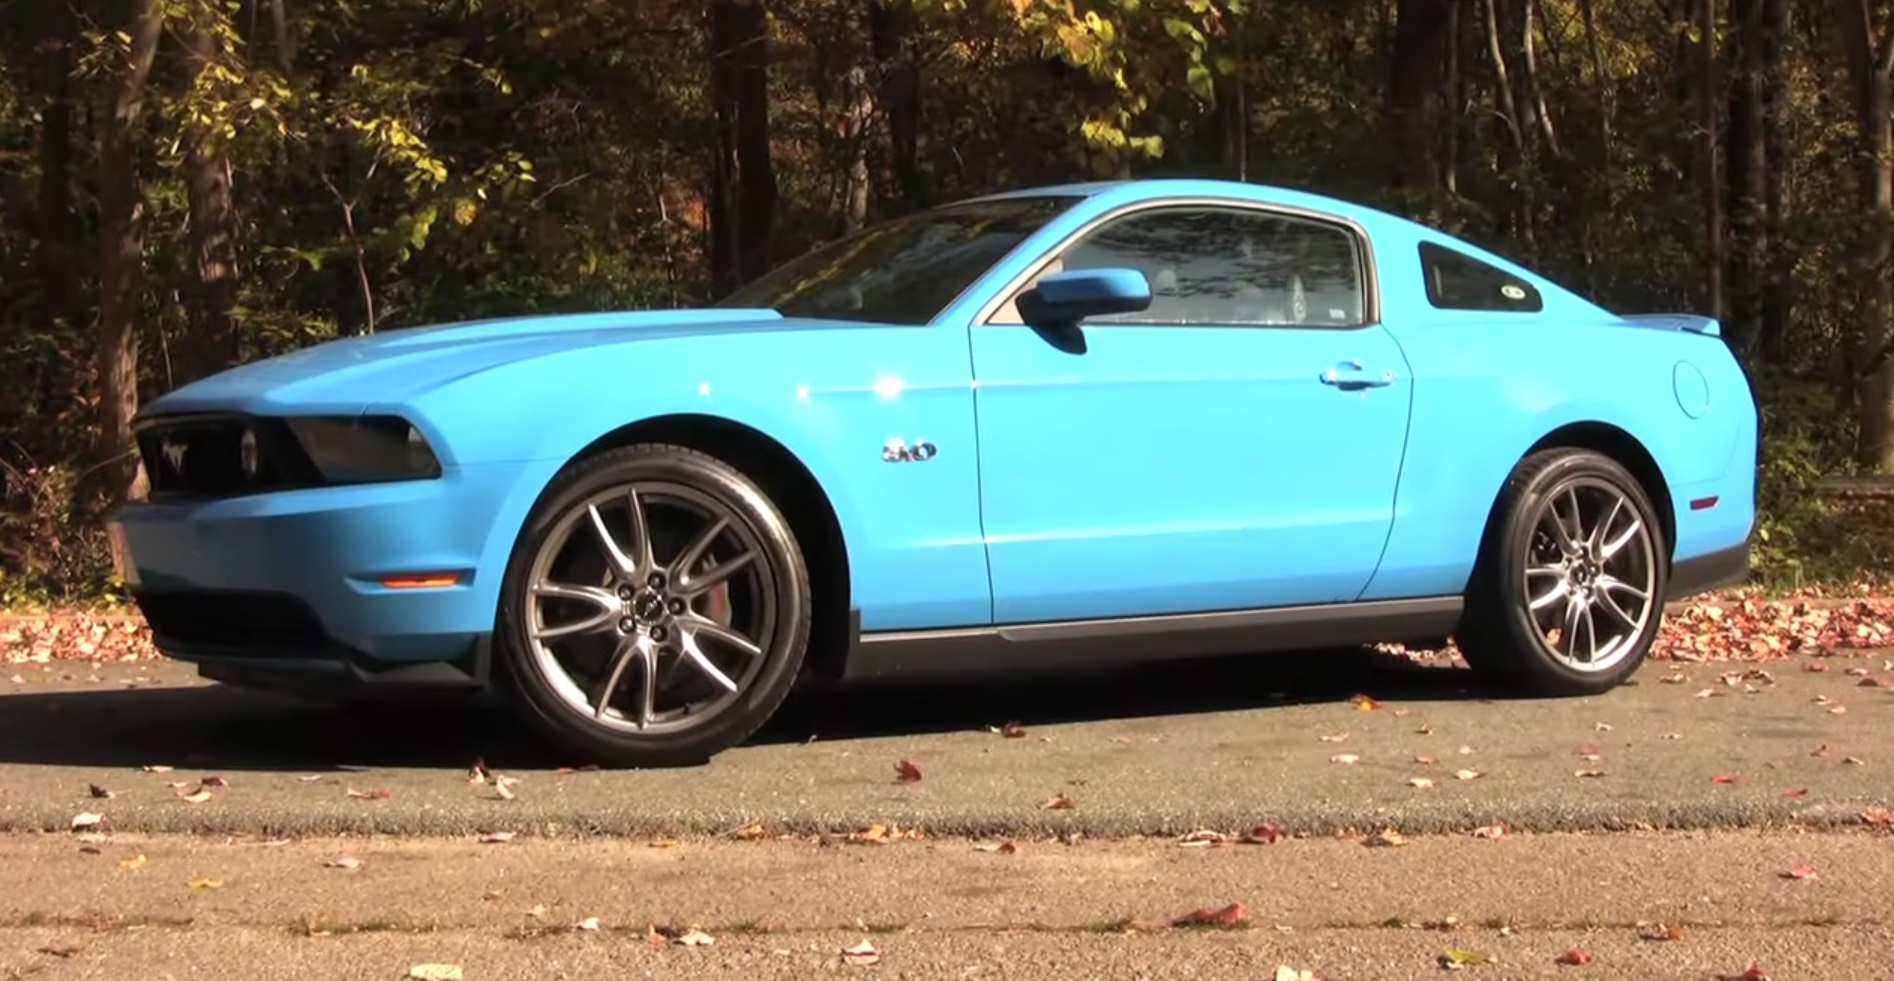 Video: 2011 Ford Mustang GT Review & Road Test